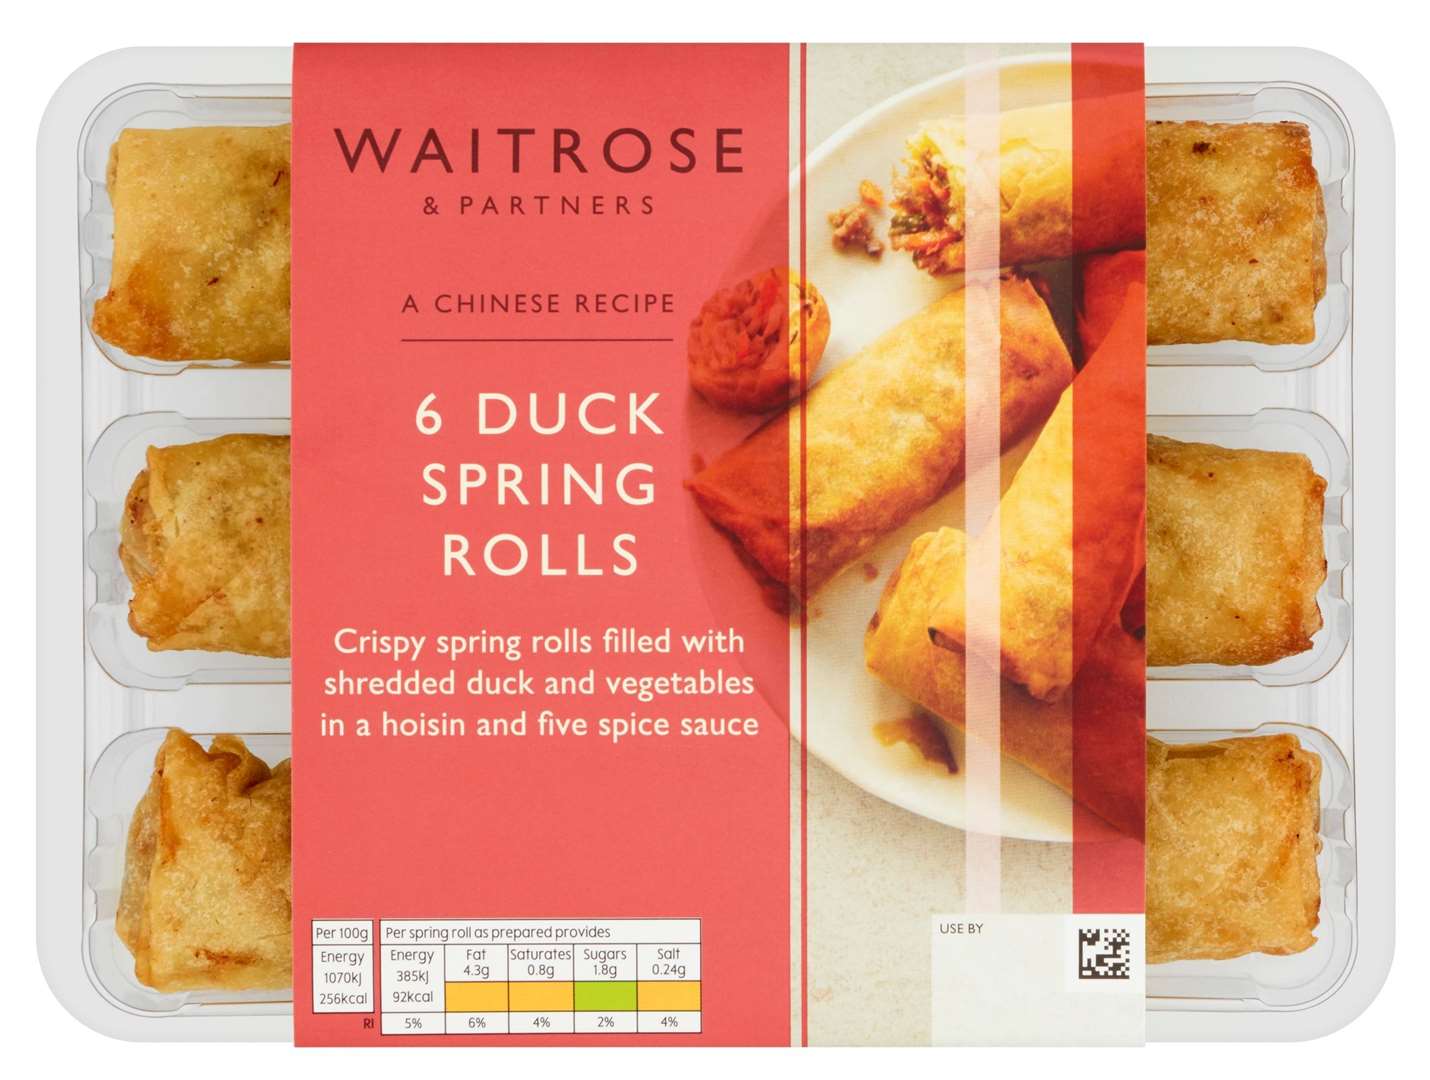 Waitrose has 25% off its prepared Chinese dishes to enable shoppers to replicate their favourite take away orders